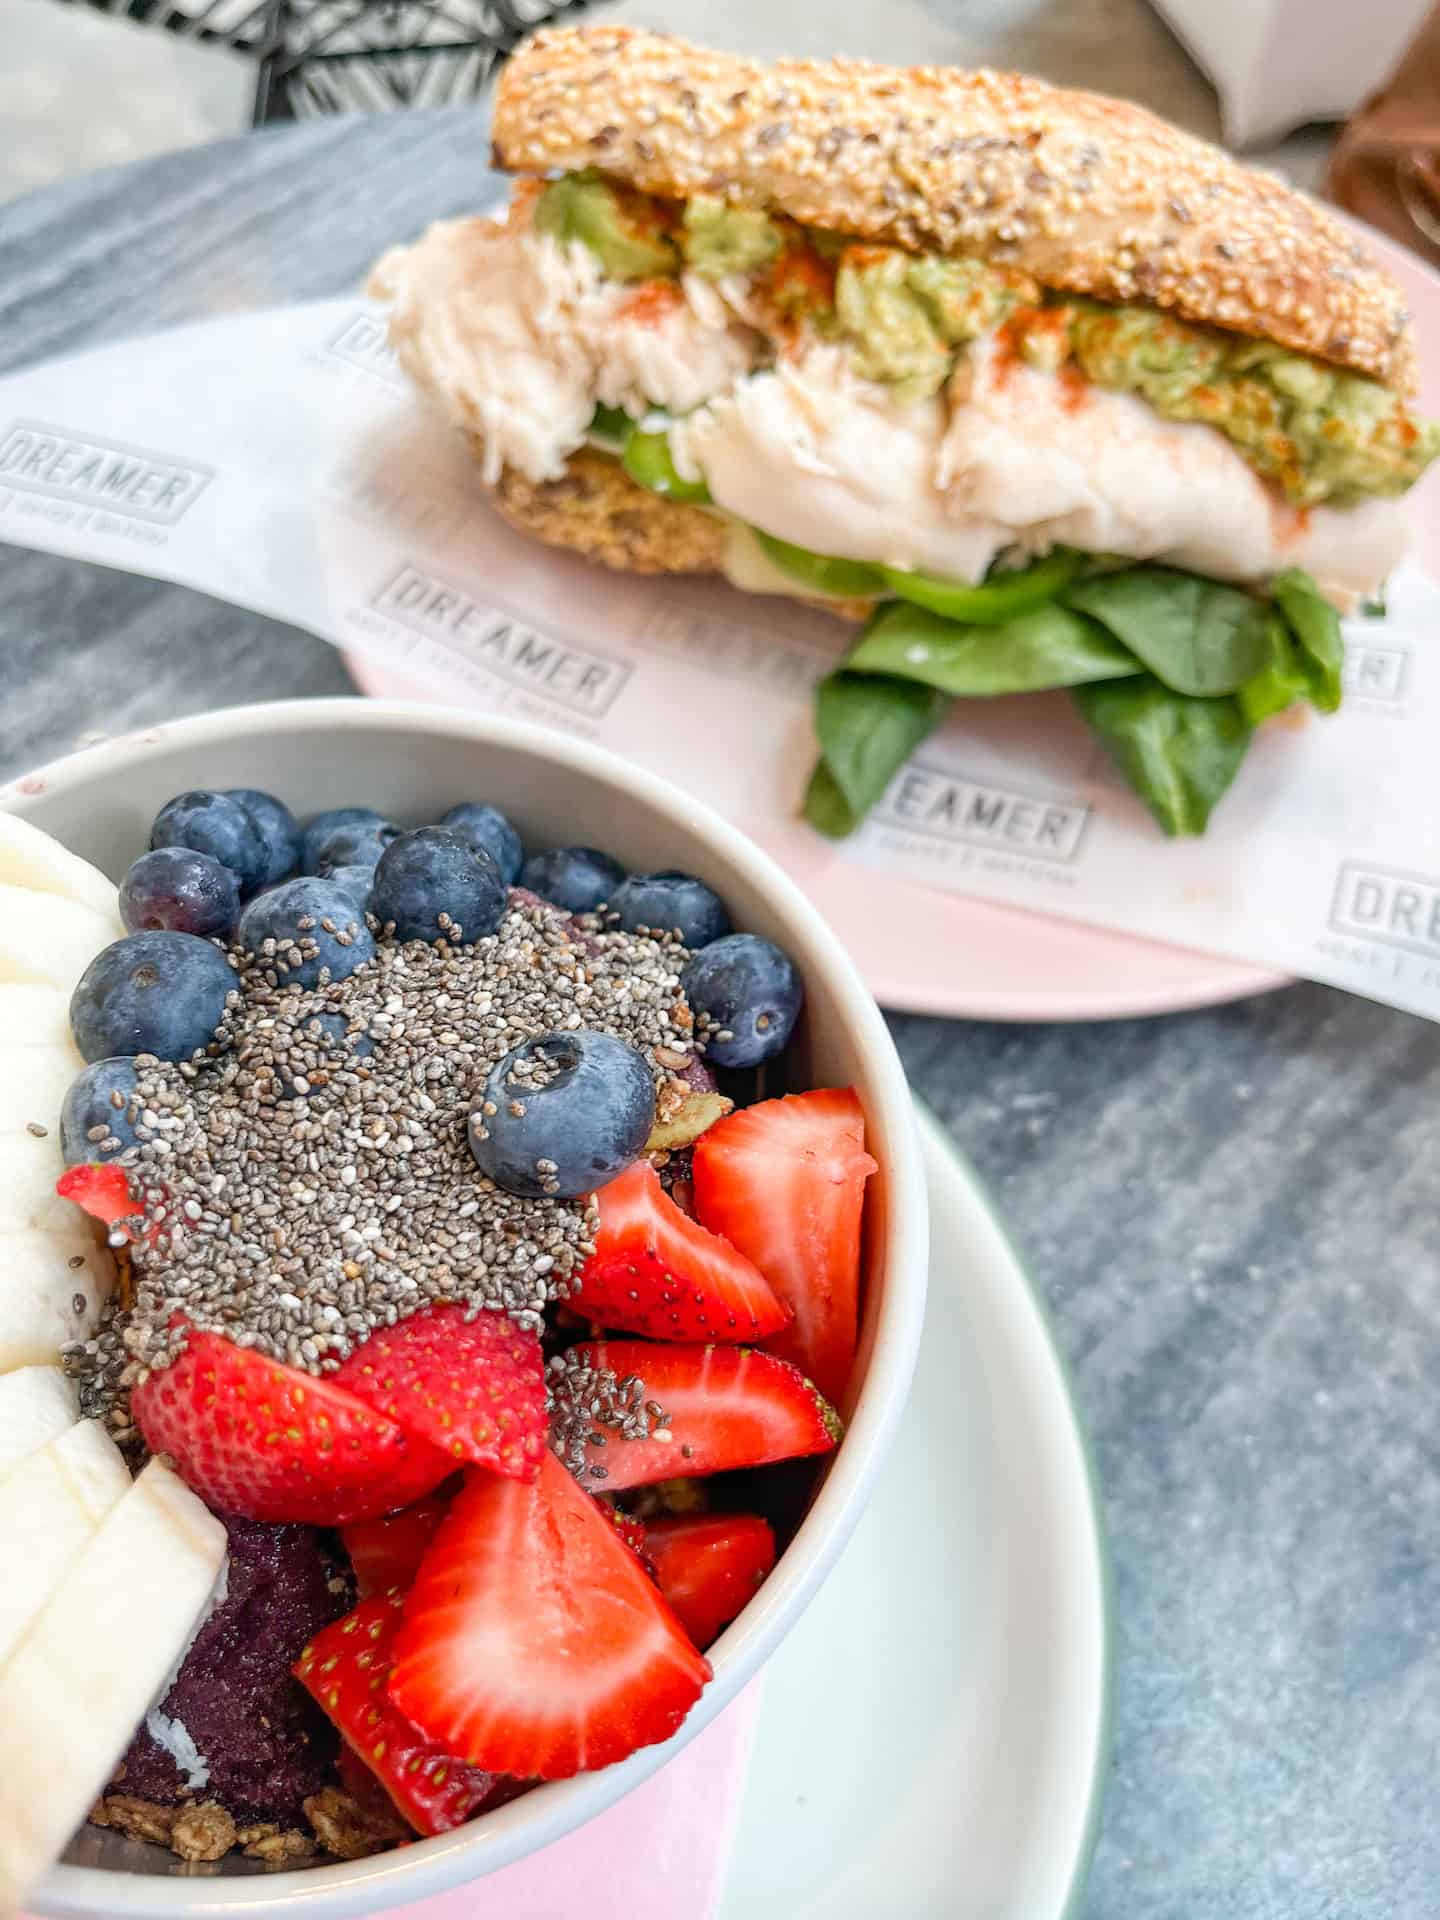 The Acai bowl and spicy turkey sandwich from Dreamers Cafe in Miami, a great place to stop and eat in between sights during your 3 day Miami itinerary.